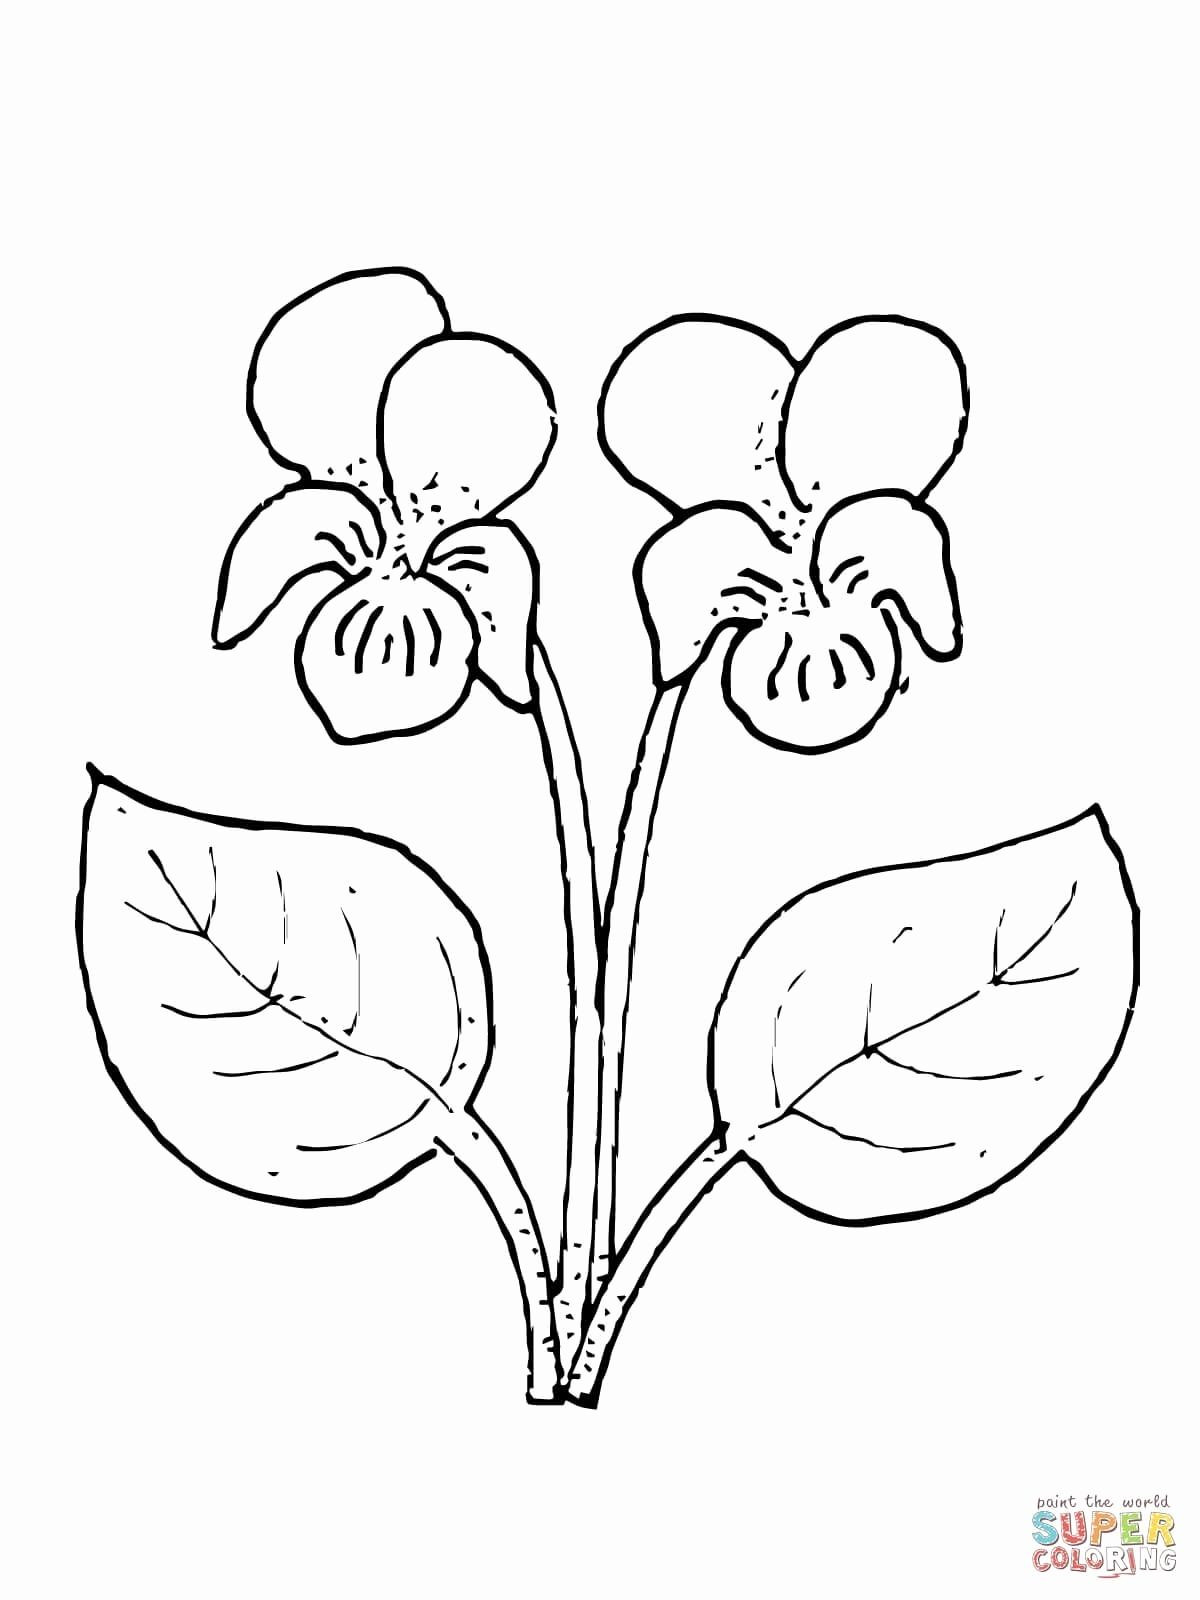 royal copenhagen vases for sale of cheap vases for sale beautiful coloring pages awesome cool vases for cheap vases for sale beautiful coloring pages awesome cool vases flower vase coloring fun time